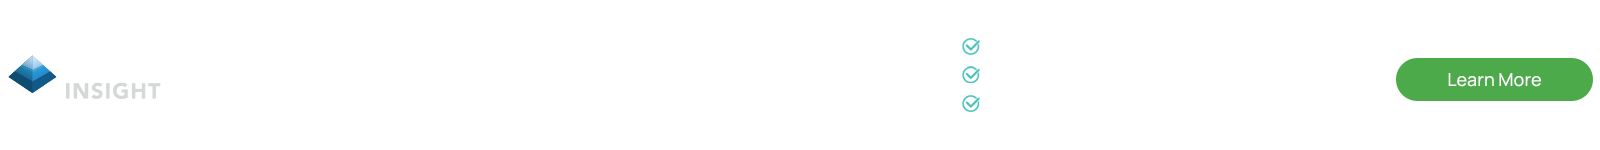 Incentive Plan Analytics Calculator: Precisely Analyze How Your Peers Design Individual Incentive Plans